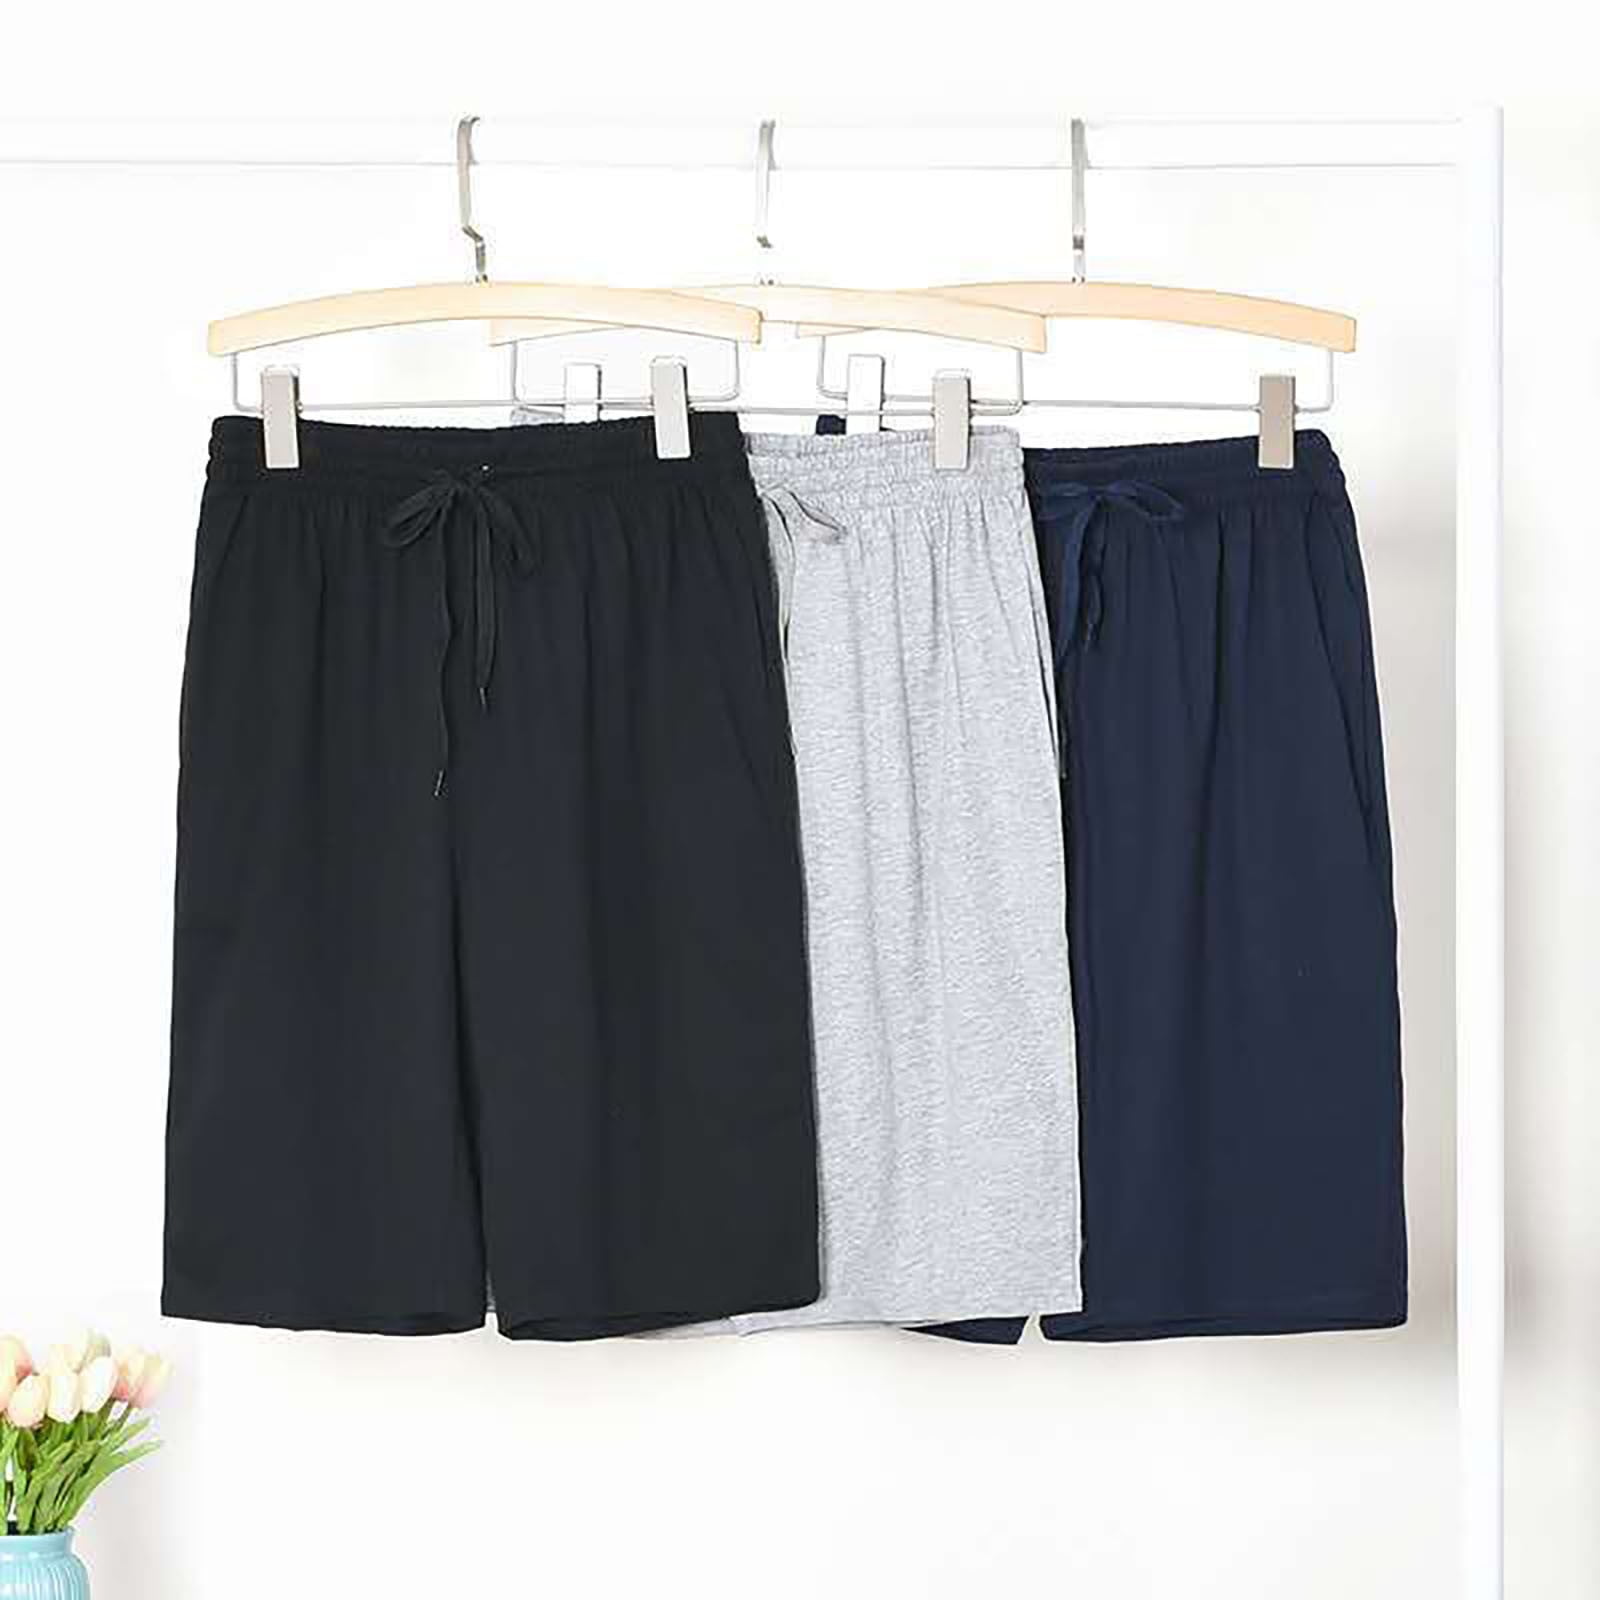 Aayomet Mens Gym Shorts Men's Summer Casual Fashion Solid Color Shorts ...